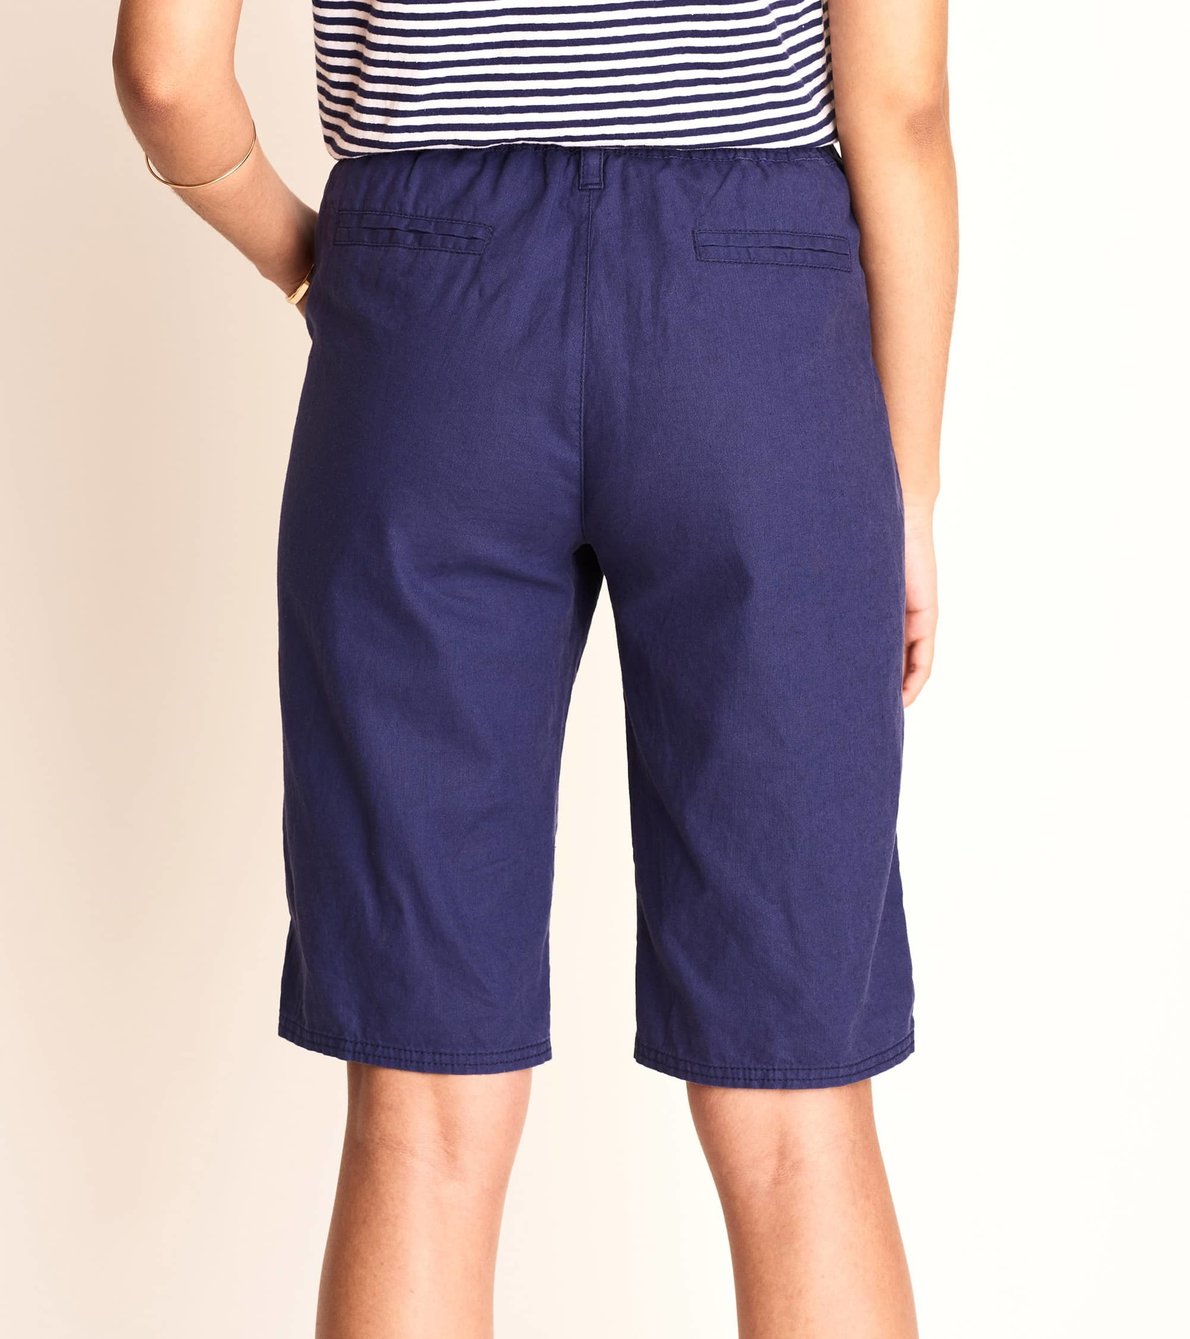 View larger image of Jessie Shorts - Navy